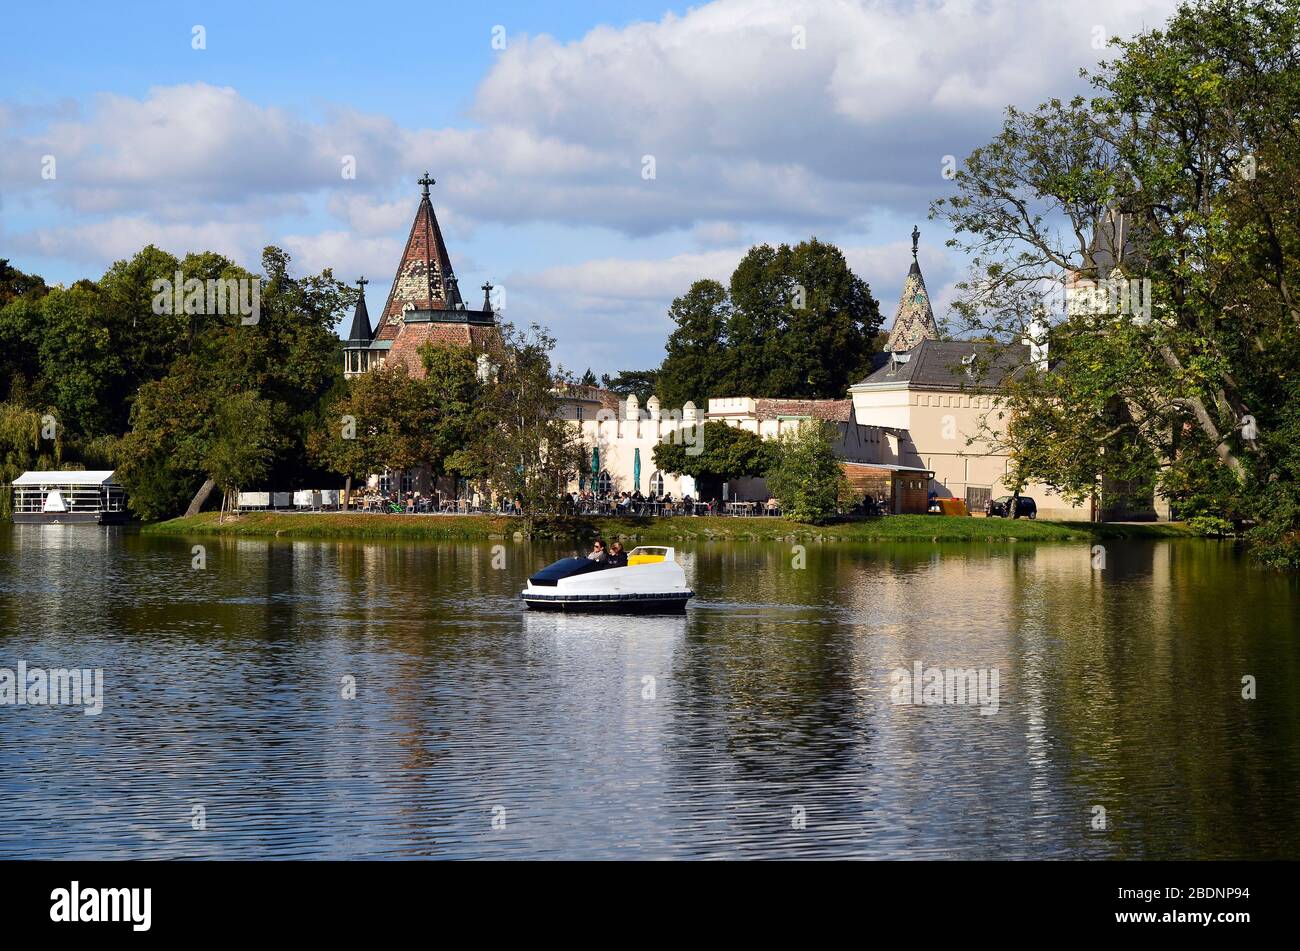 Laxenburg, Austria - October 15, 2011: Unidentified people in kind of boat and castle Franzensburg with cafe-restaurant, the tiny castle is situated o Stock Photo